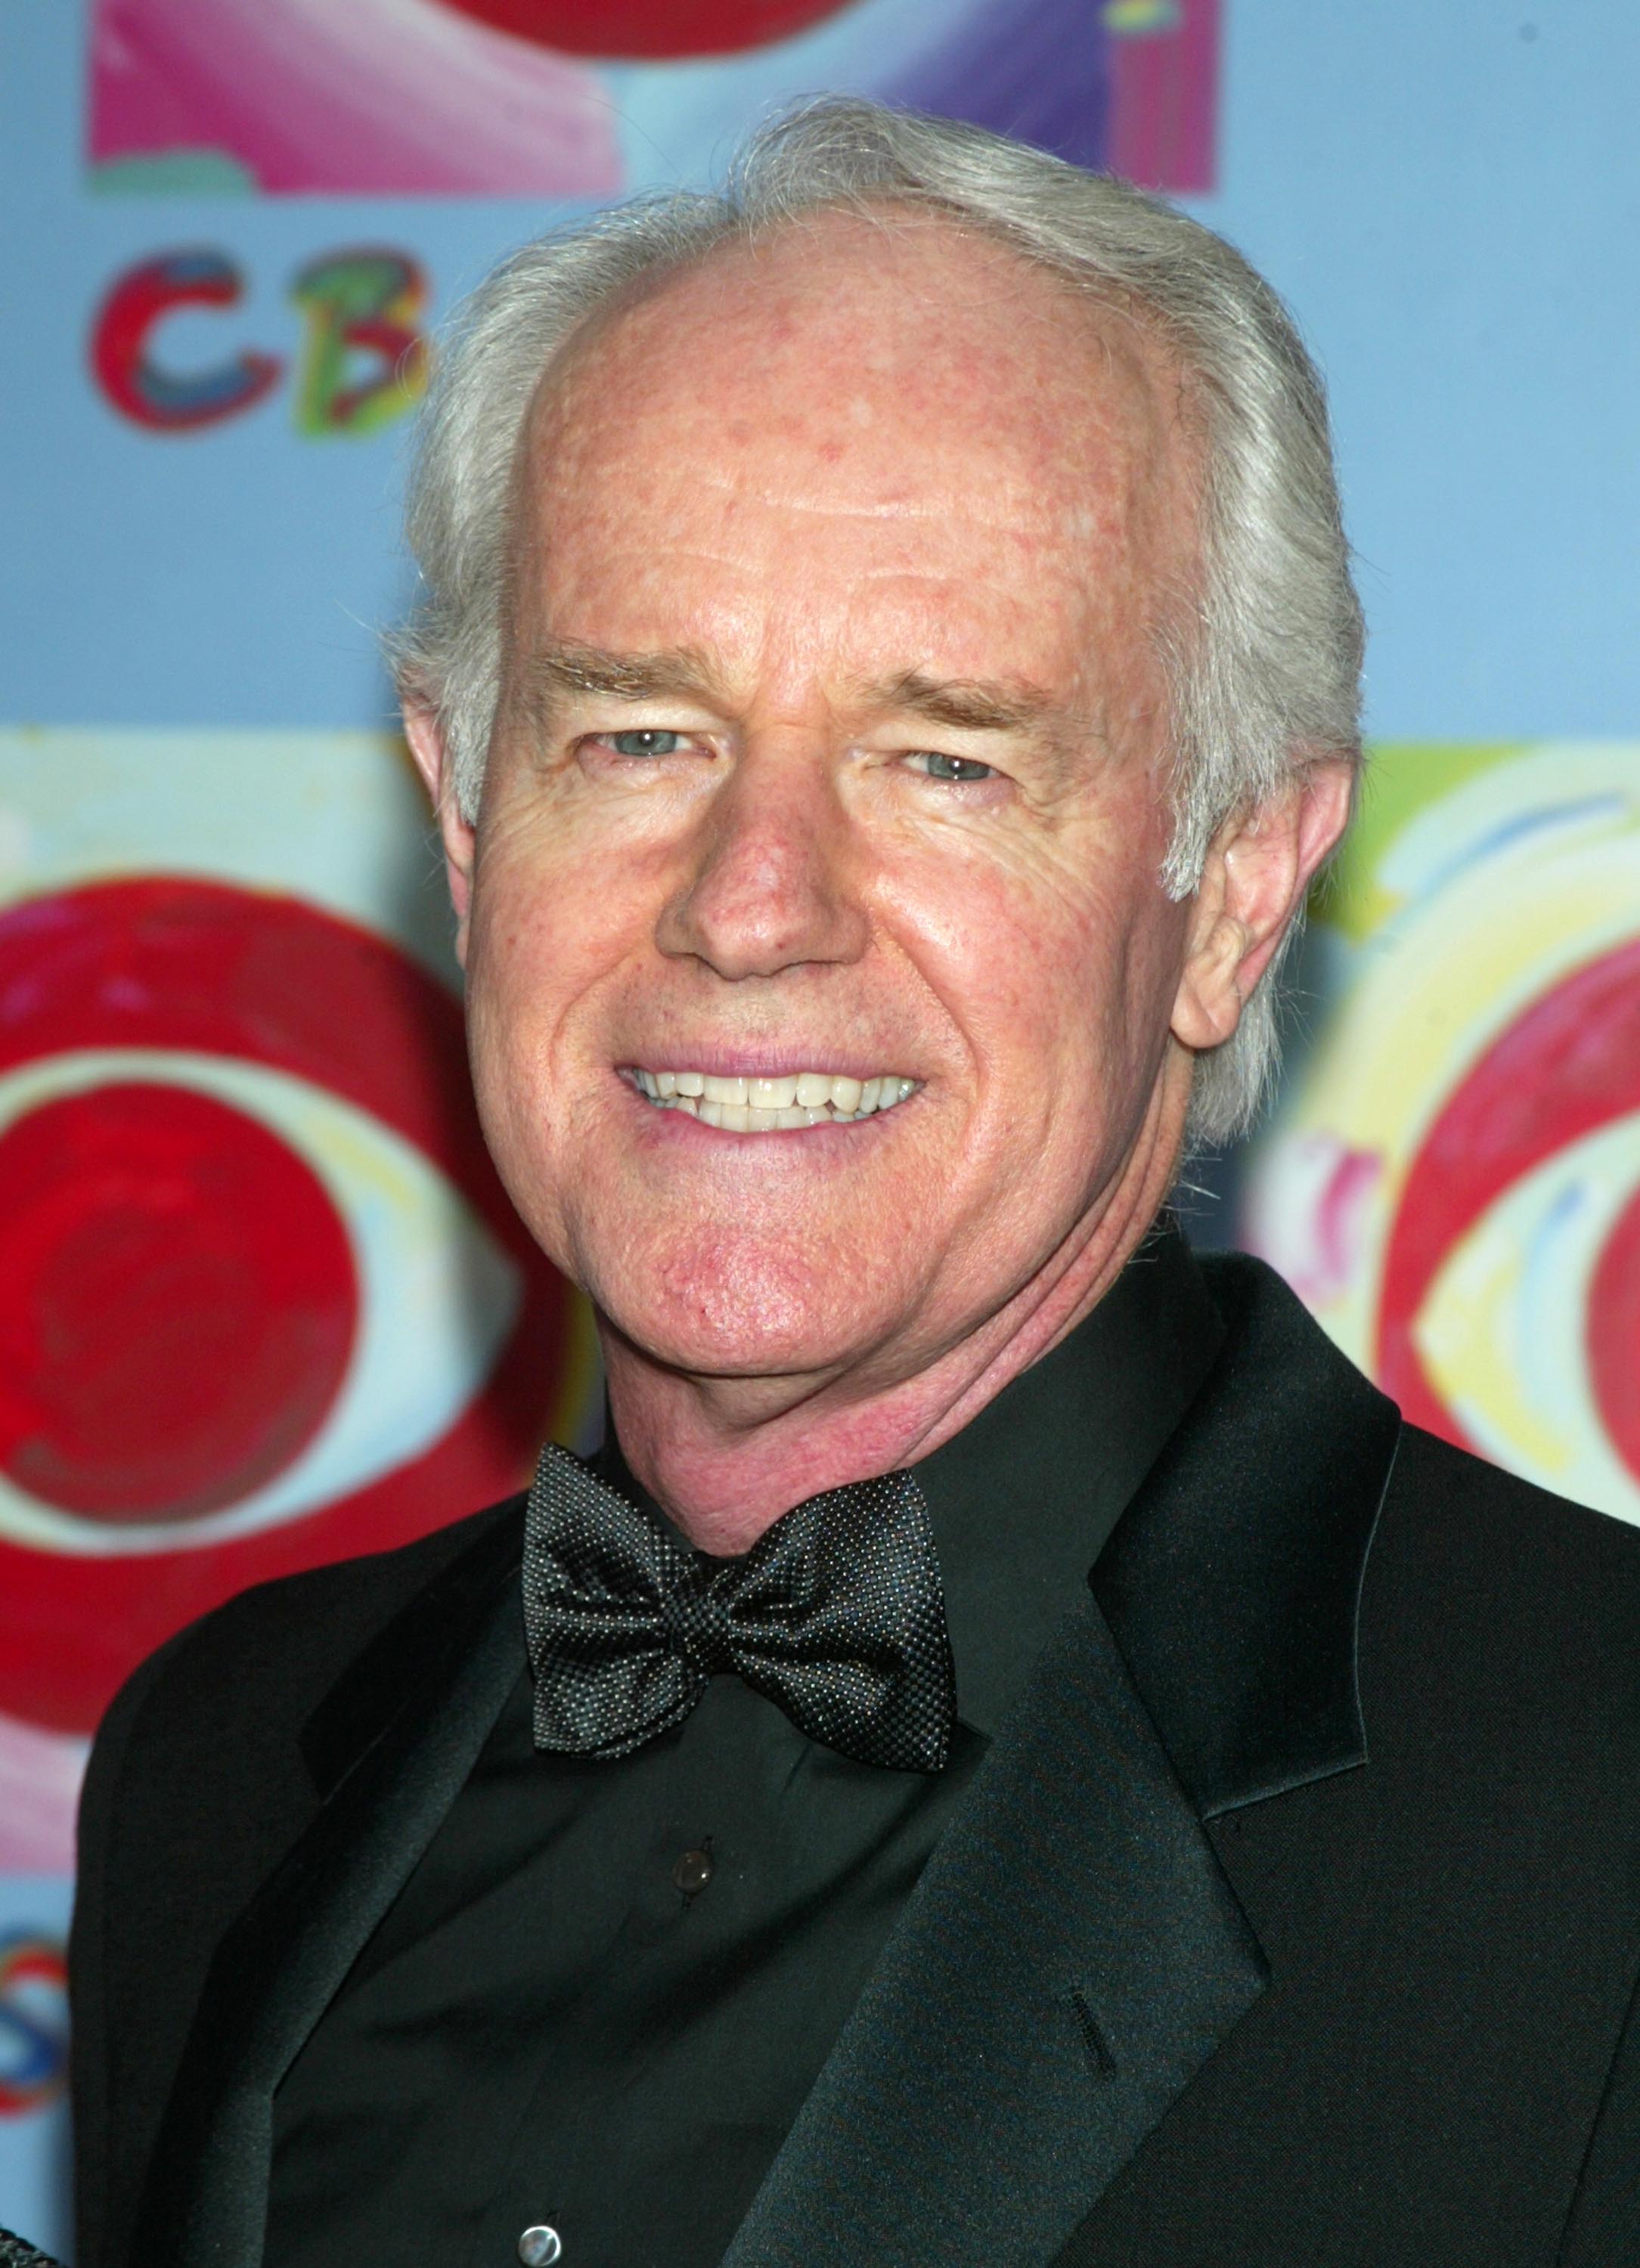 Mike Farrell during CBS at 75 at Hammerstein Ballroom in New York City, New York, on November 2, 2003 | Source: Getty Images